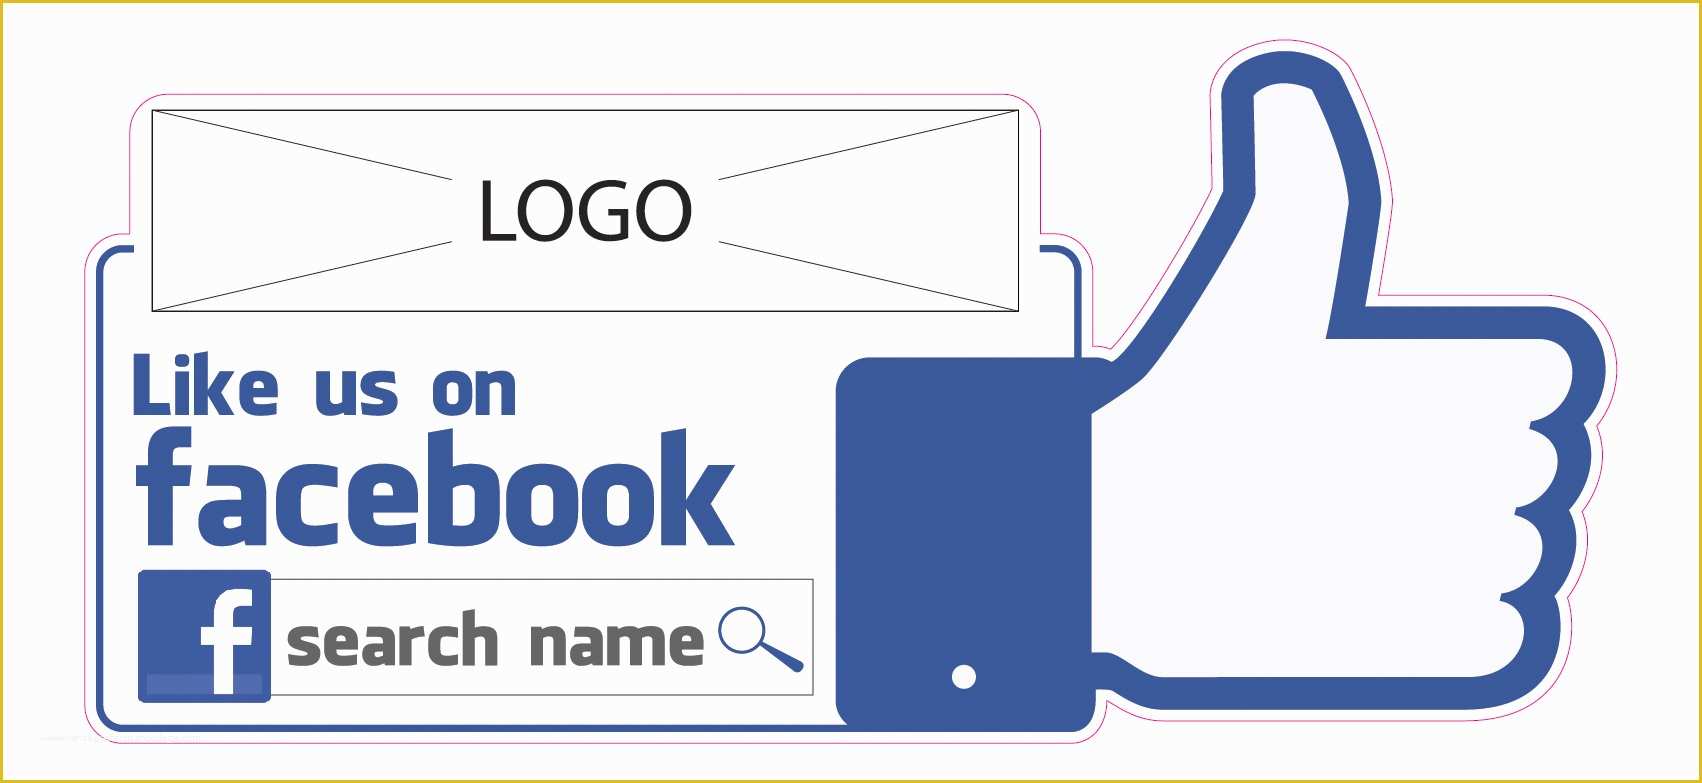 Free Like Us On Facebook Template Of Materials White 5mm Die Cut Foamboard with Sticker